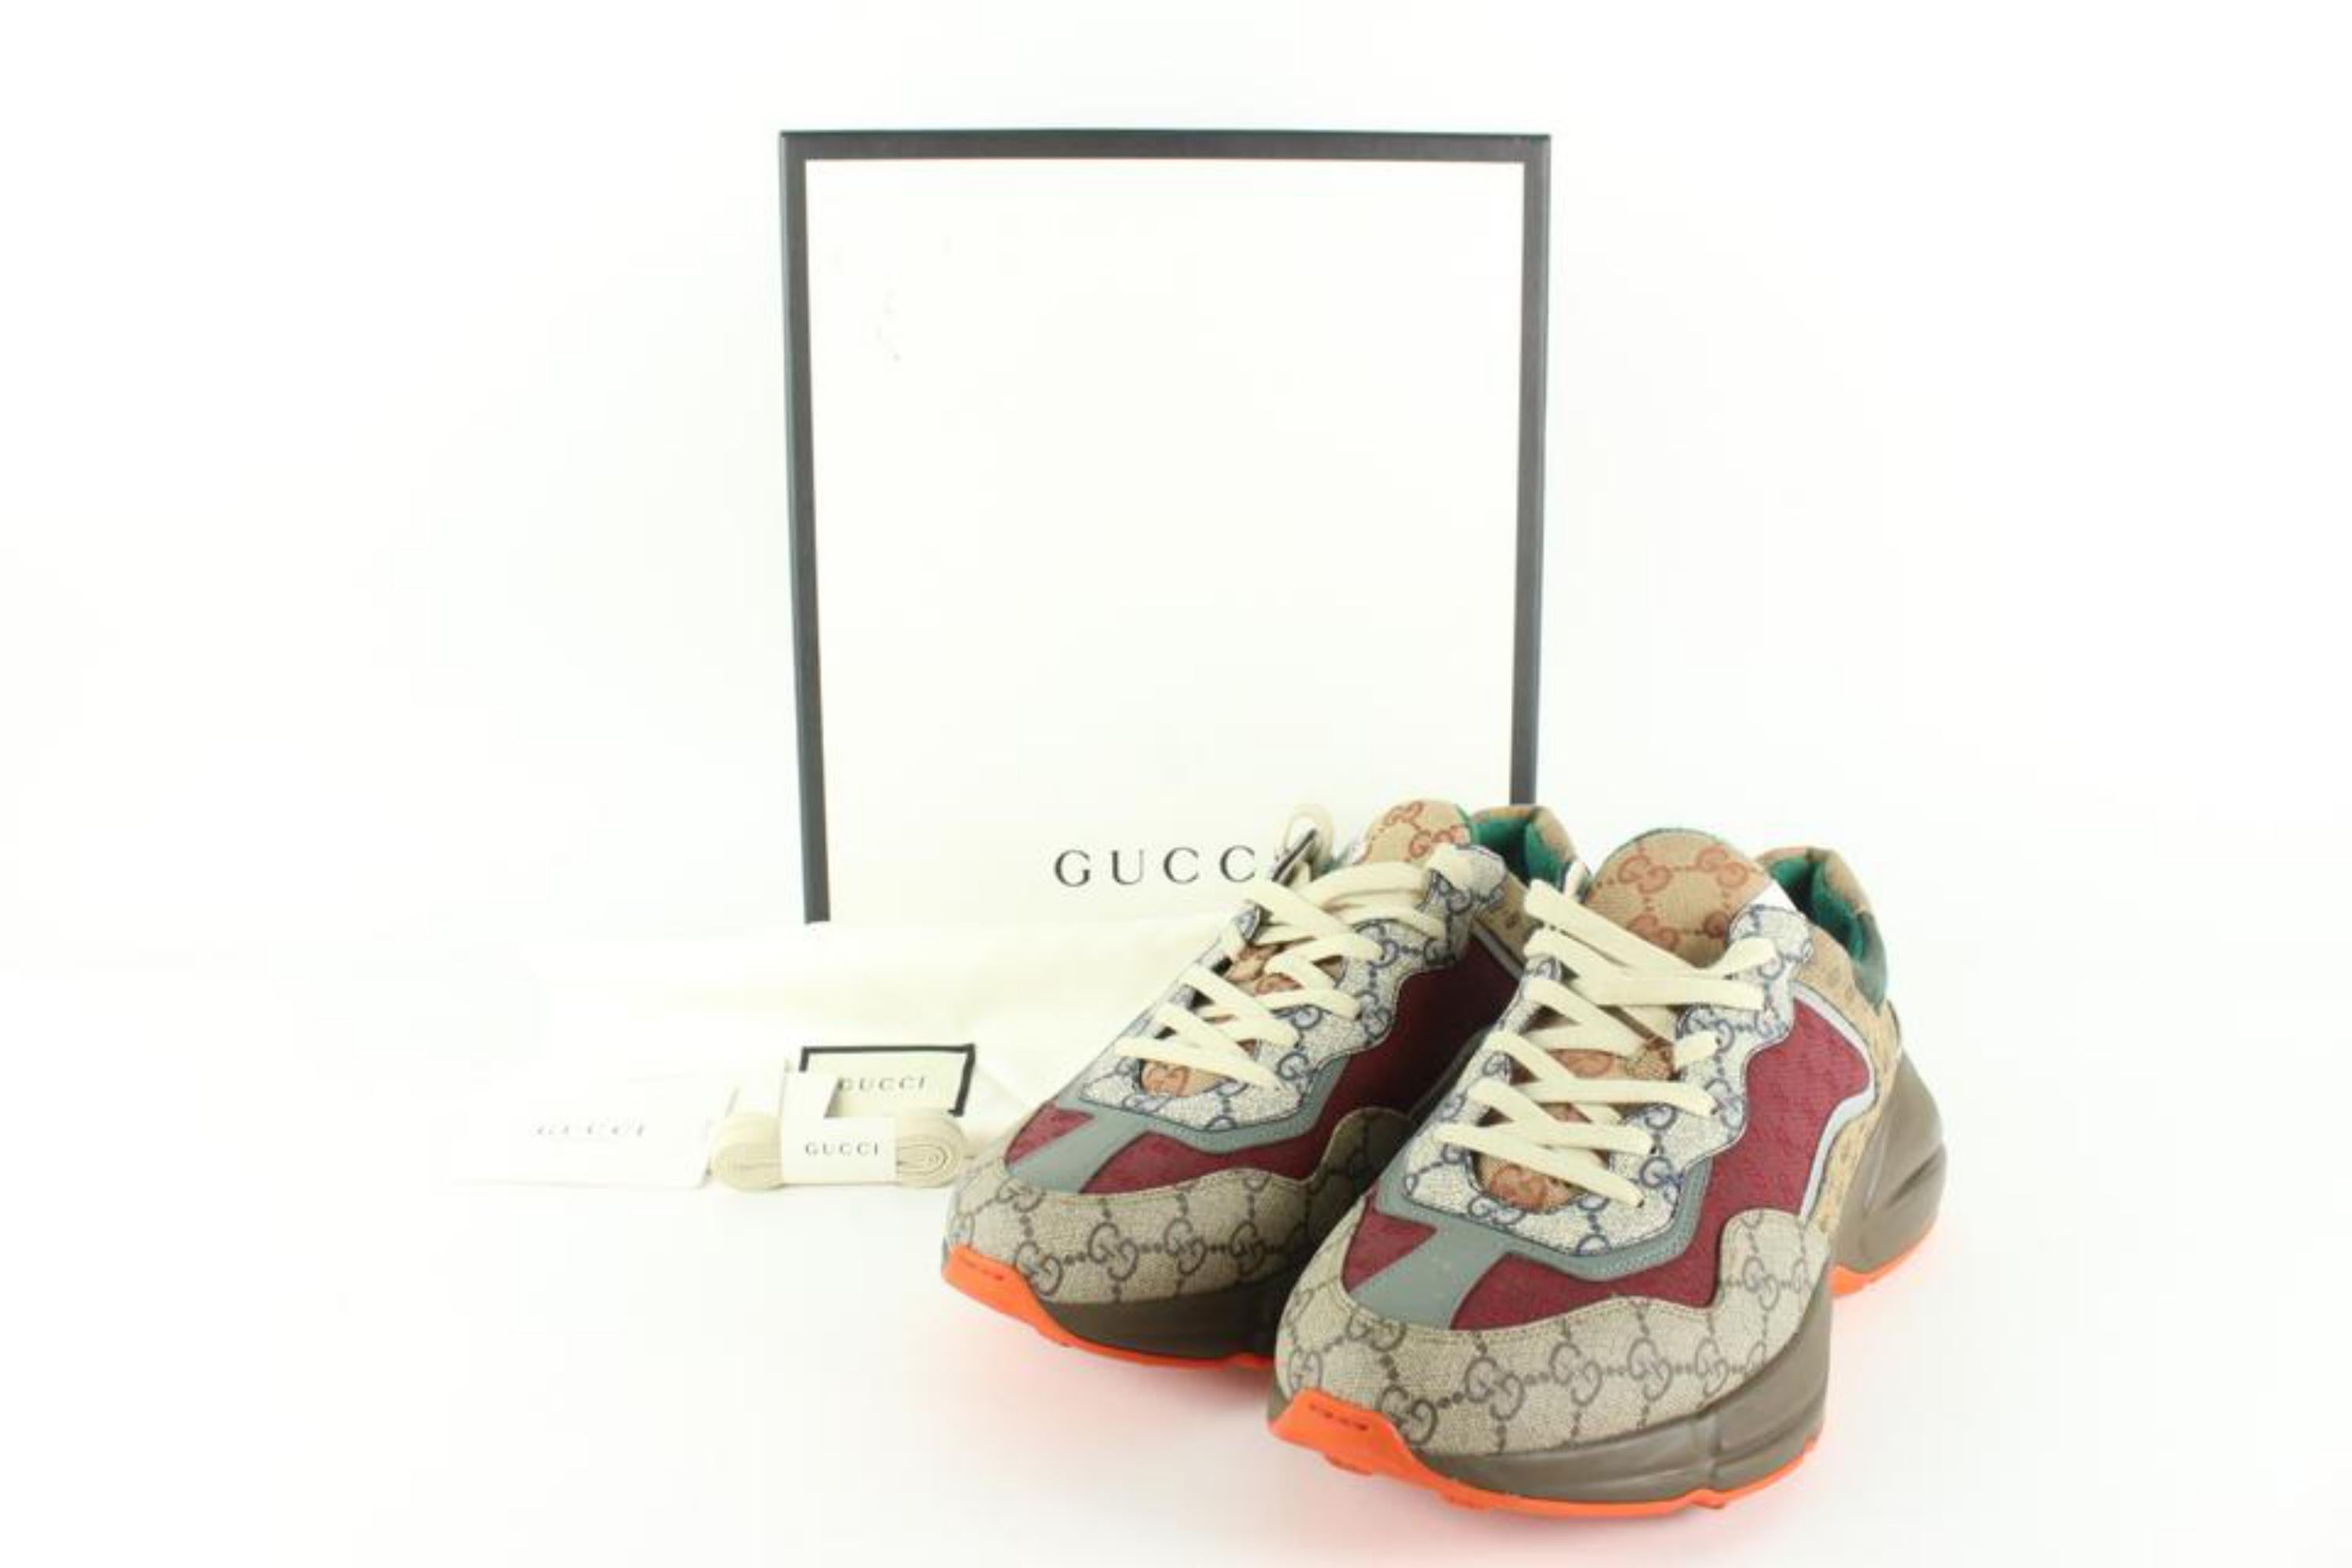 Gucci 12.5 Men's US Rhyton Mixed Media Sneakers 80g524s 7